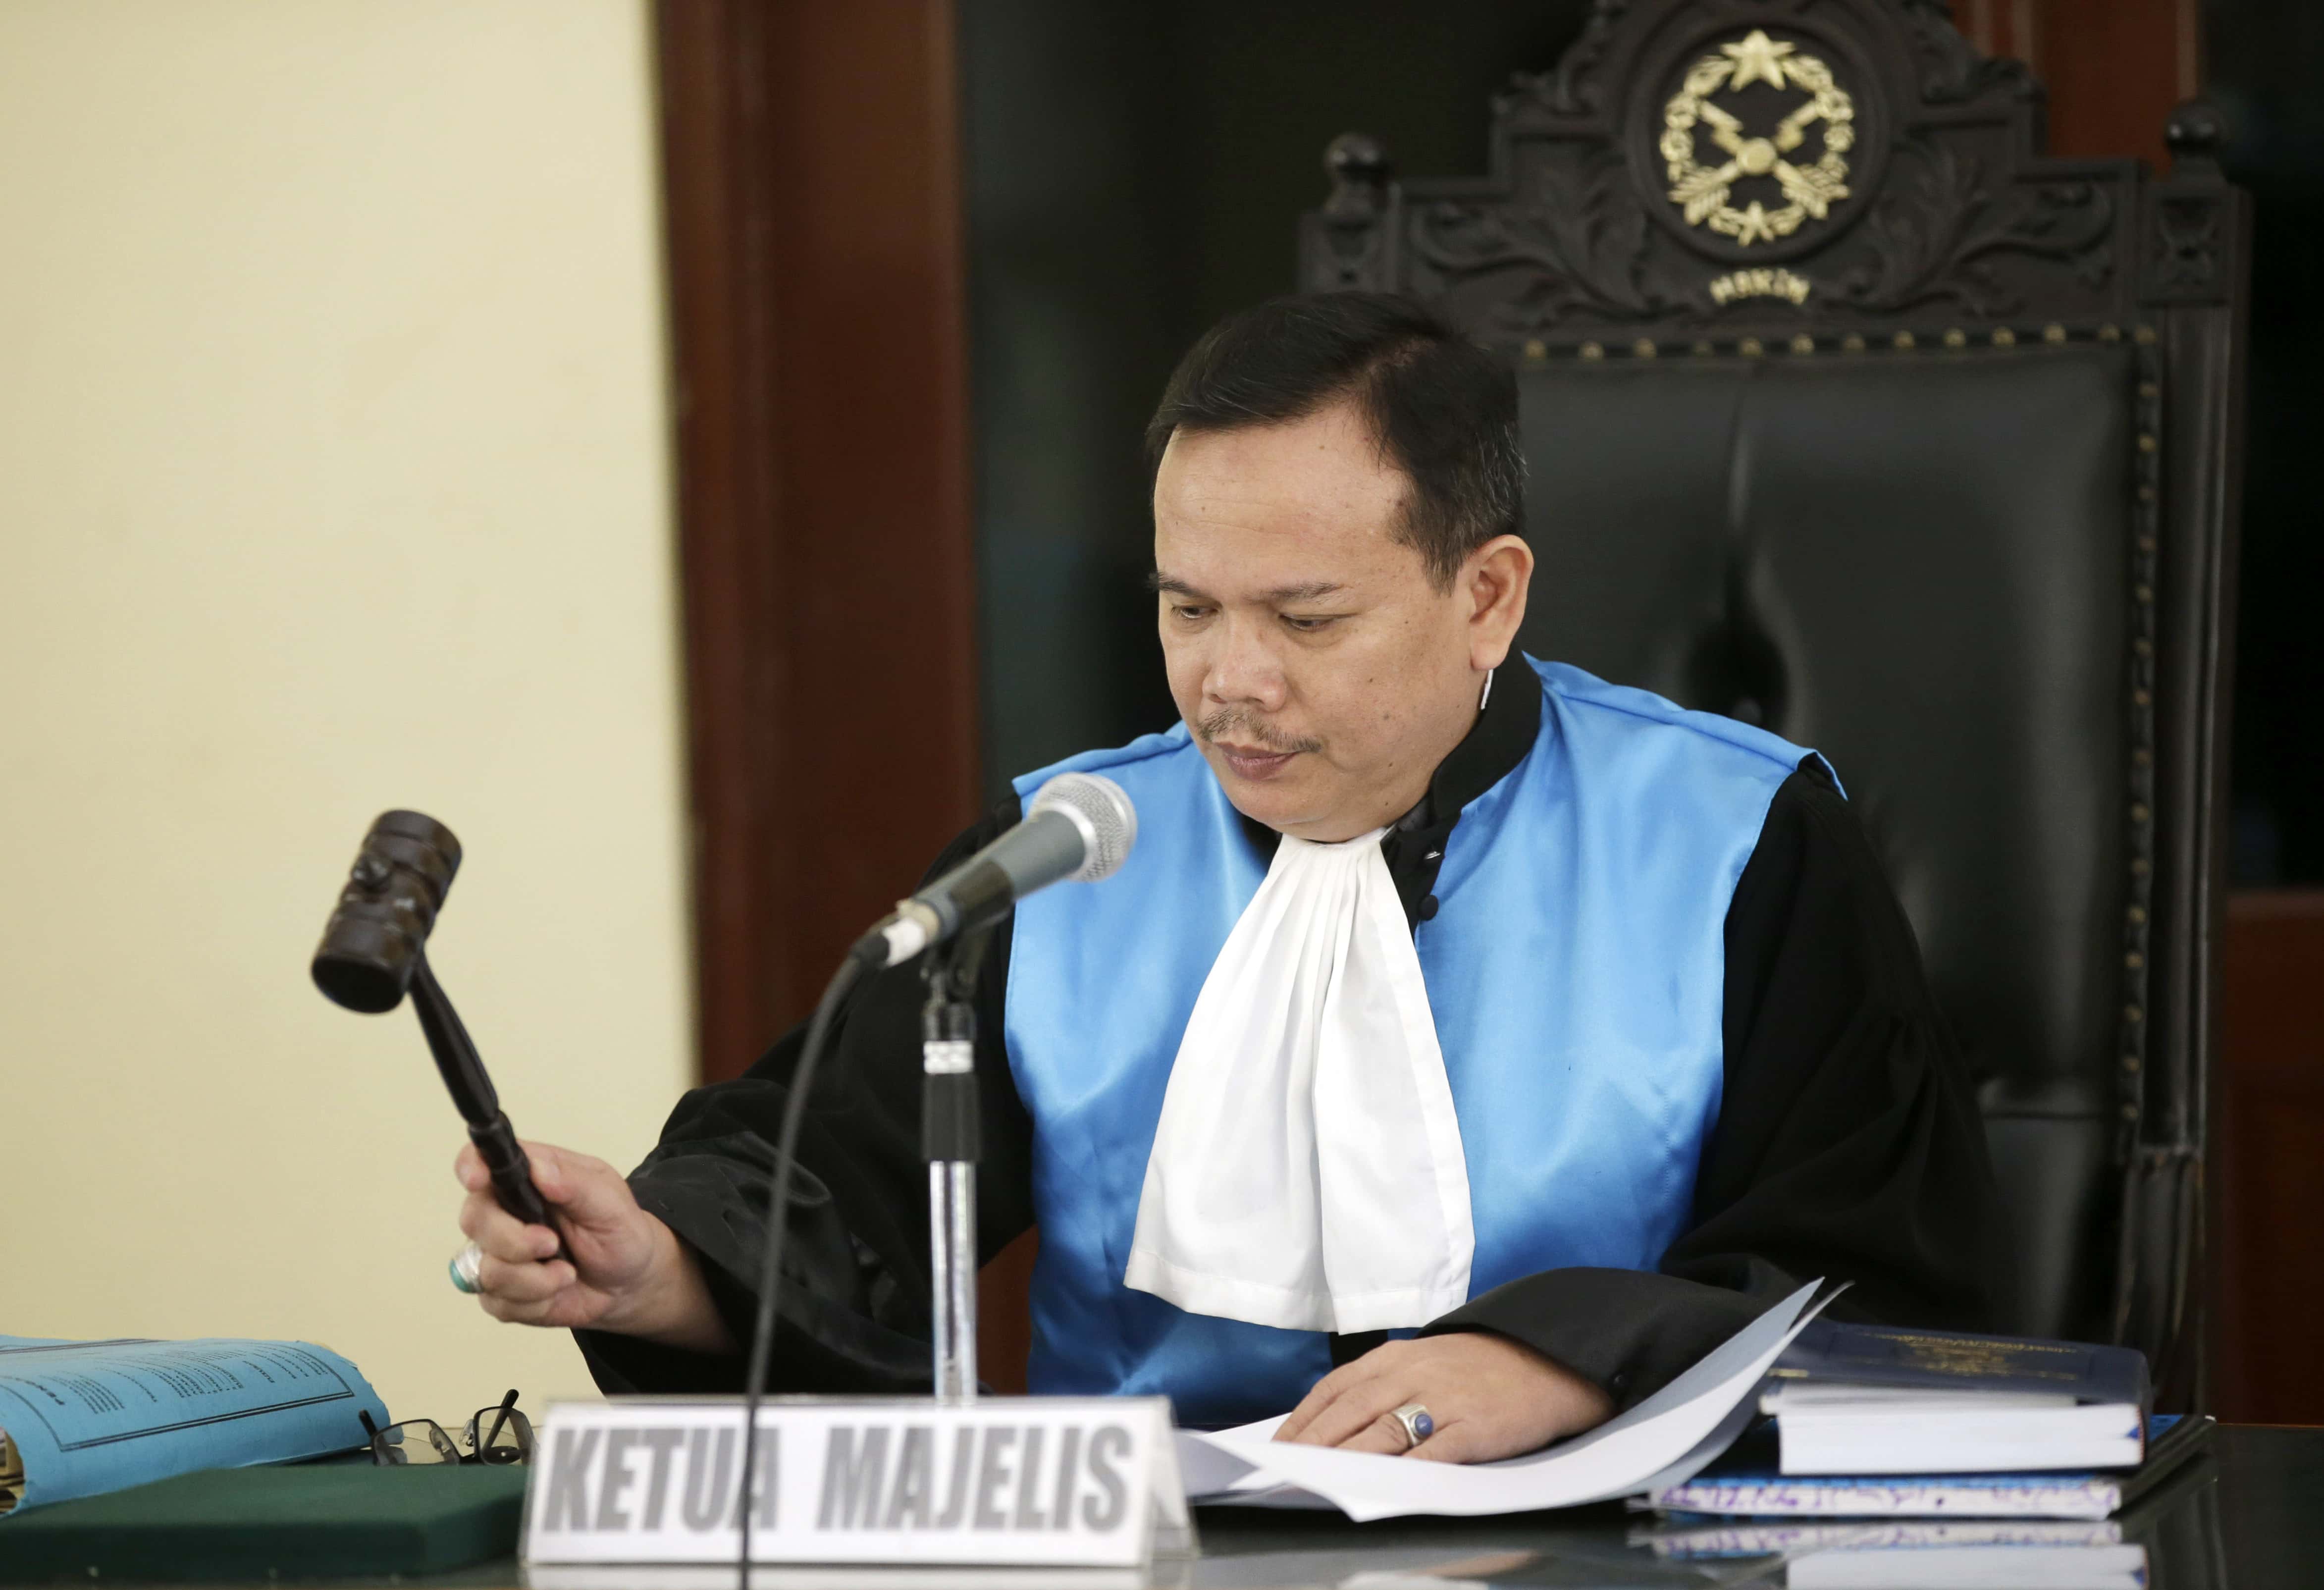 A judge is pictured during a hearing at the State Administrative Court in Jakarta, Indonesia, 22 June 2015, AP Photo/Achmad Ibrahim